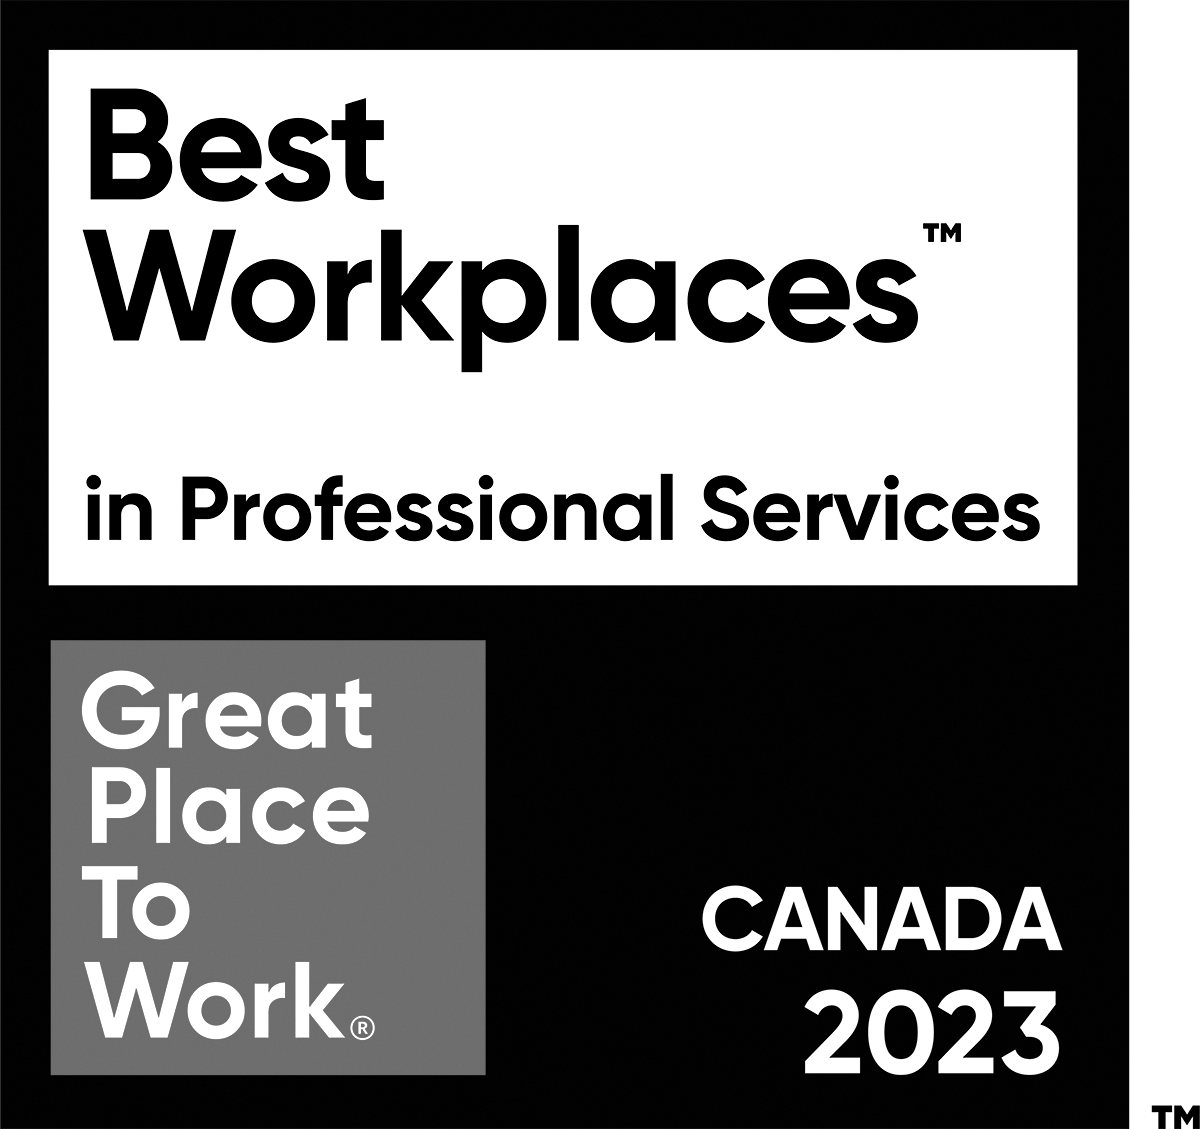 Best Workplaces for Professional Services